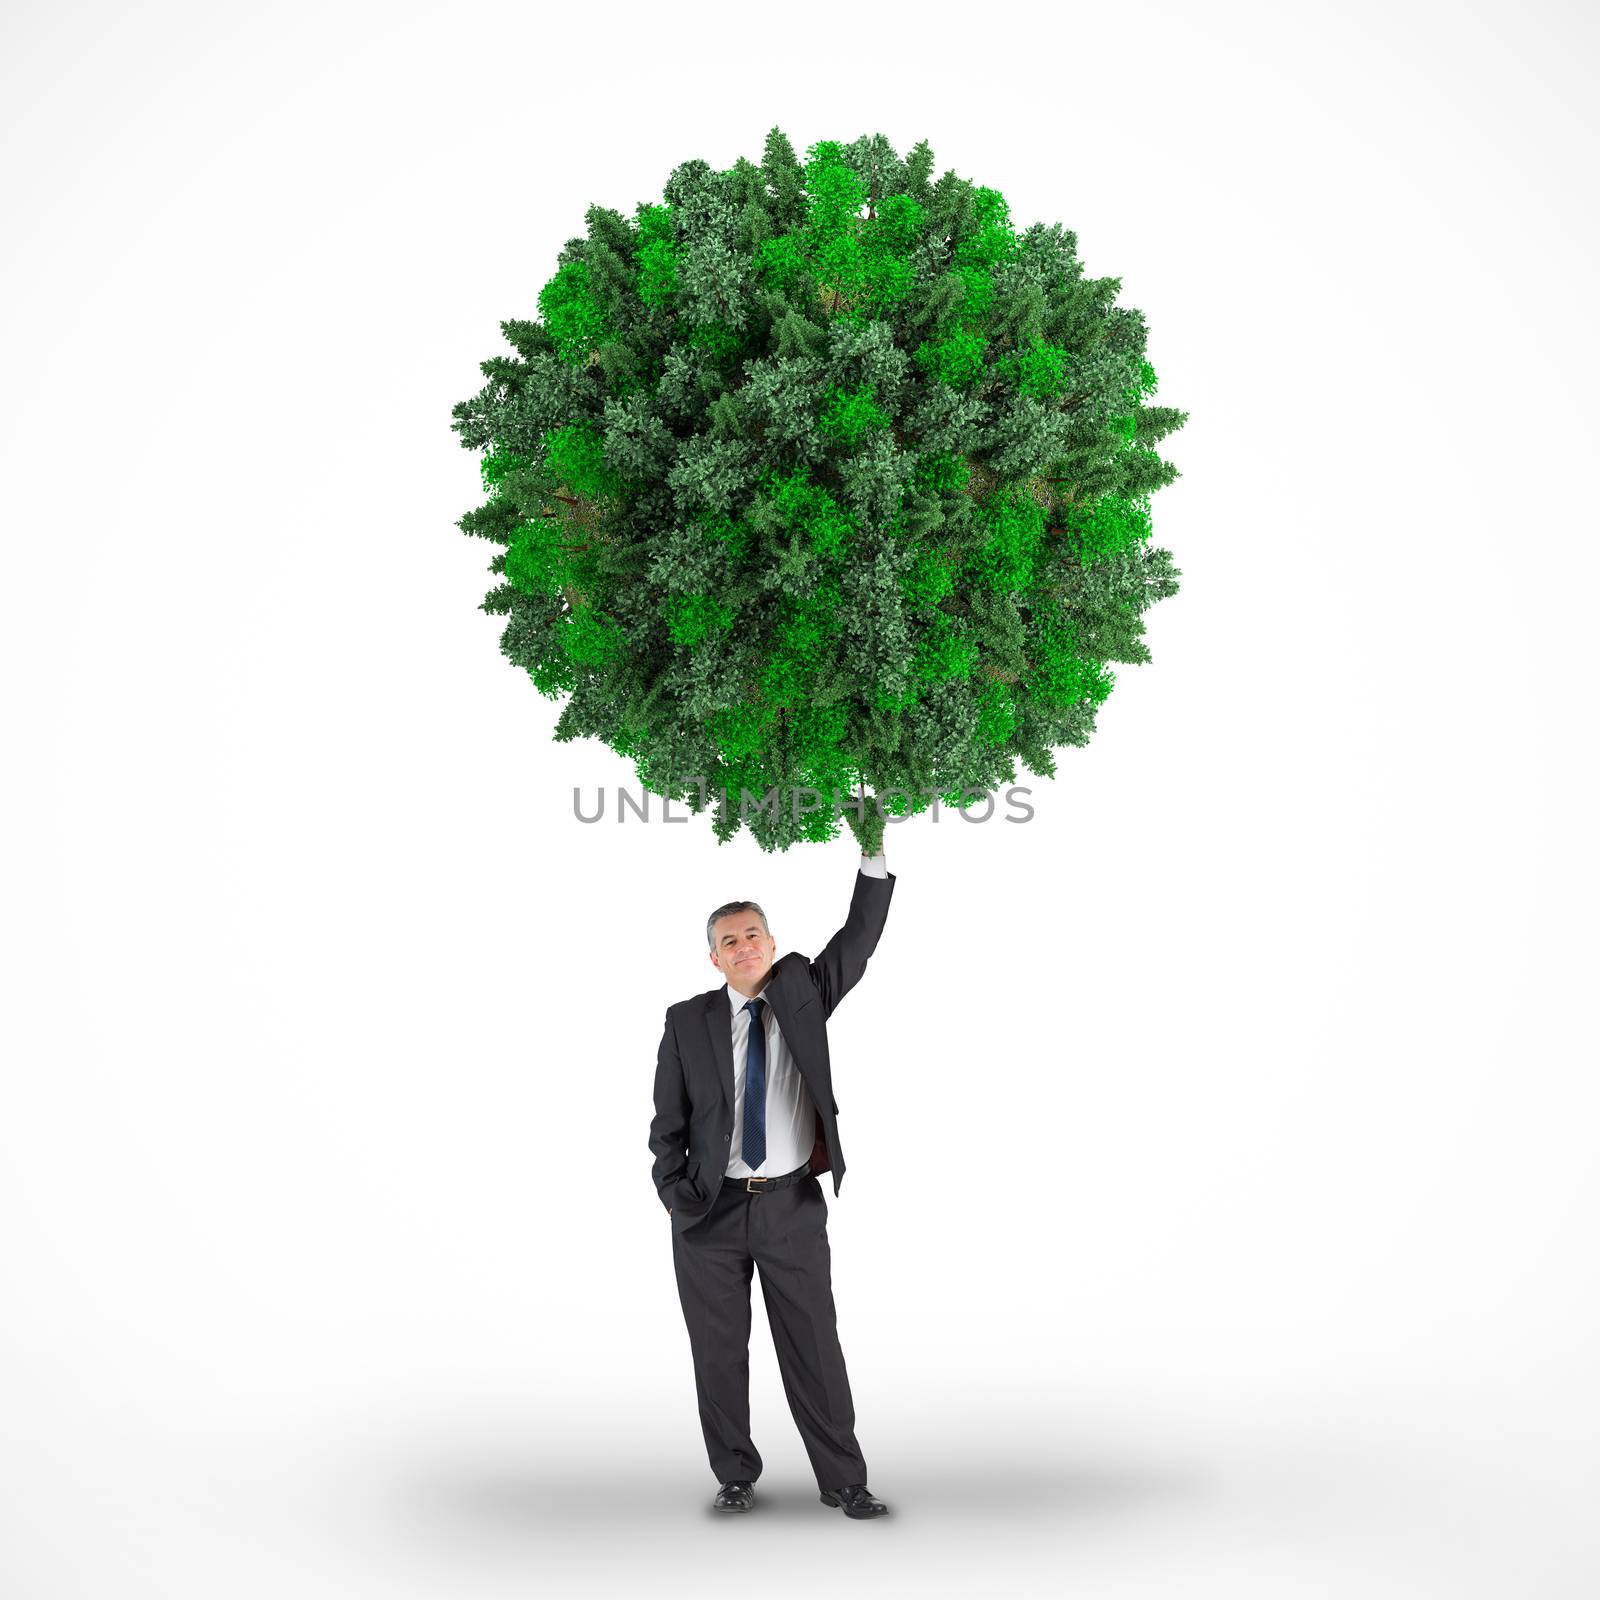 Composite image of businessman holding green sphere against white background with vignette